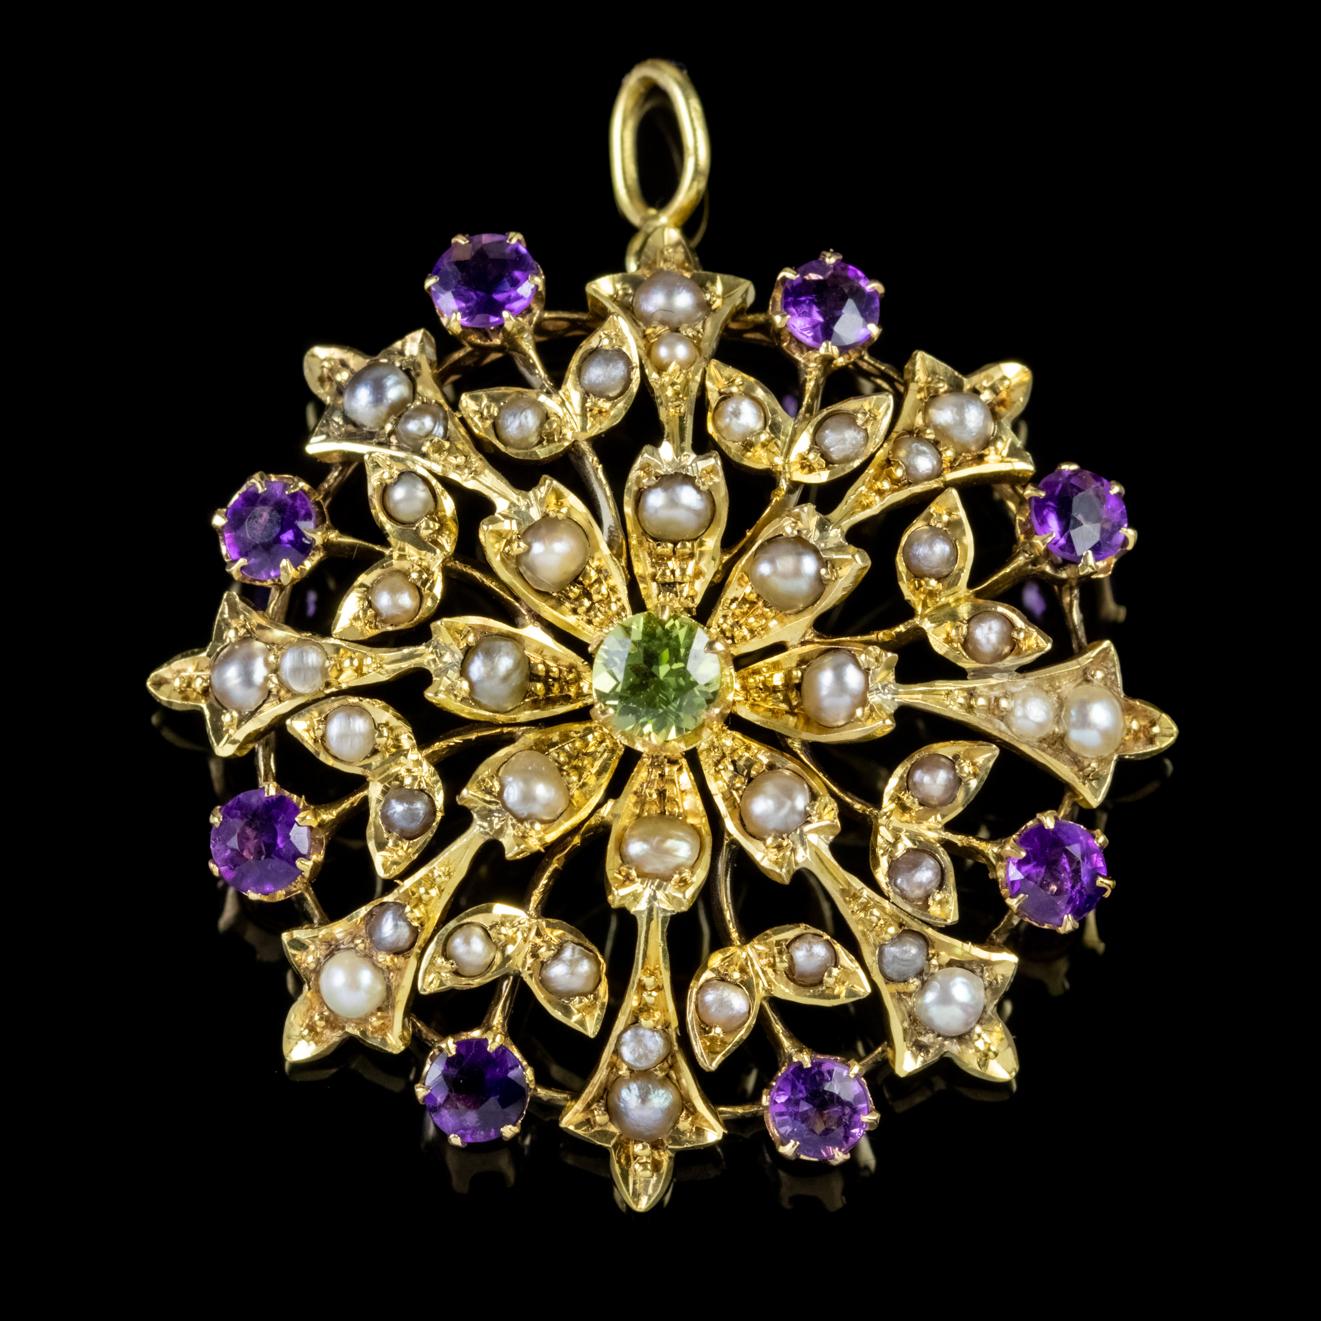 This spectacular Antique Edwardian Suffragette pendant is a starburst of Pearls and Amethysts with a lovely 0.25ct Peridot at its heart. 

Suffragette jewellery was worn to show one’s allegiance to the women’s Suffragette movement in the early 20th